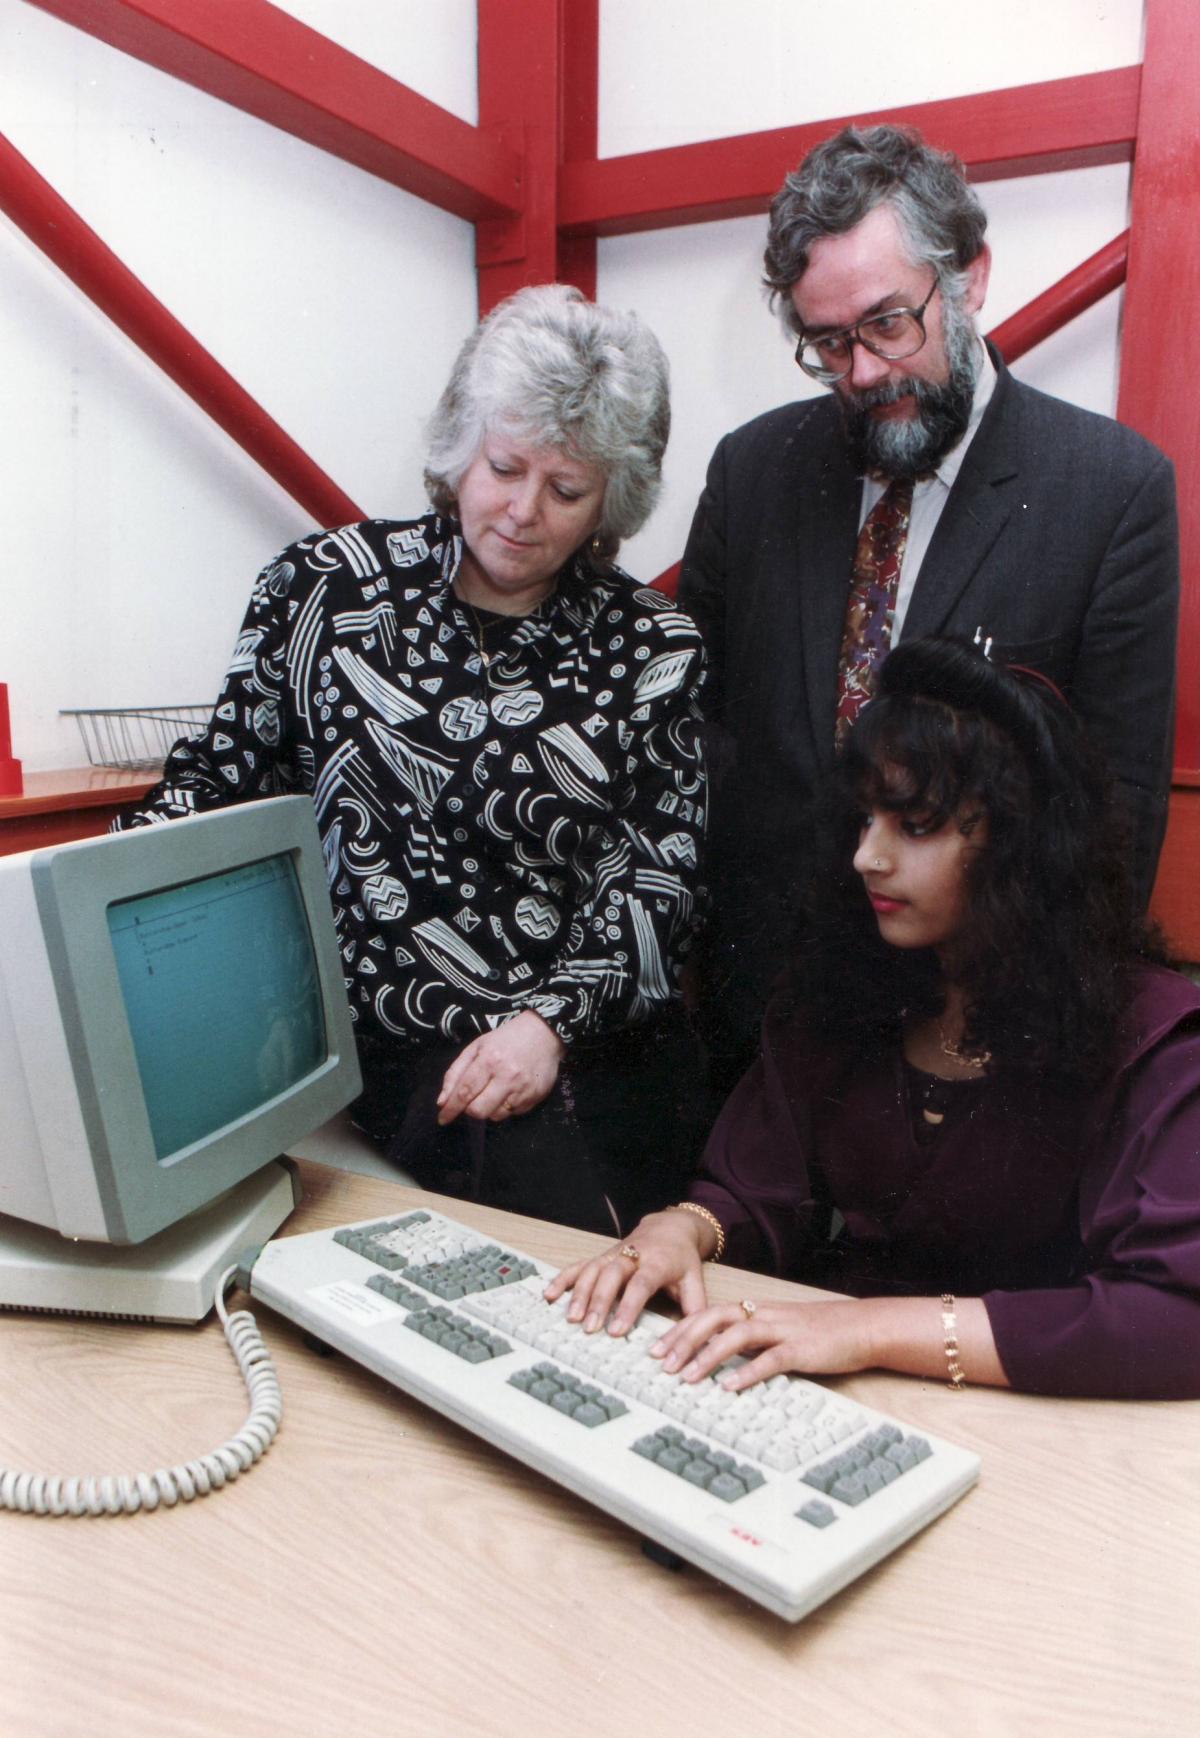 Showing how computers work in 1993 